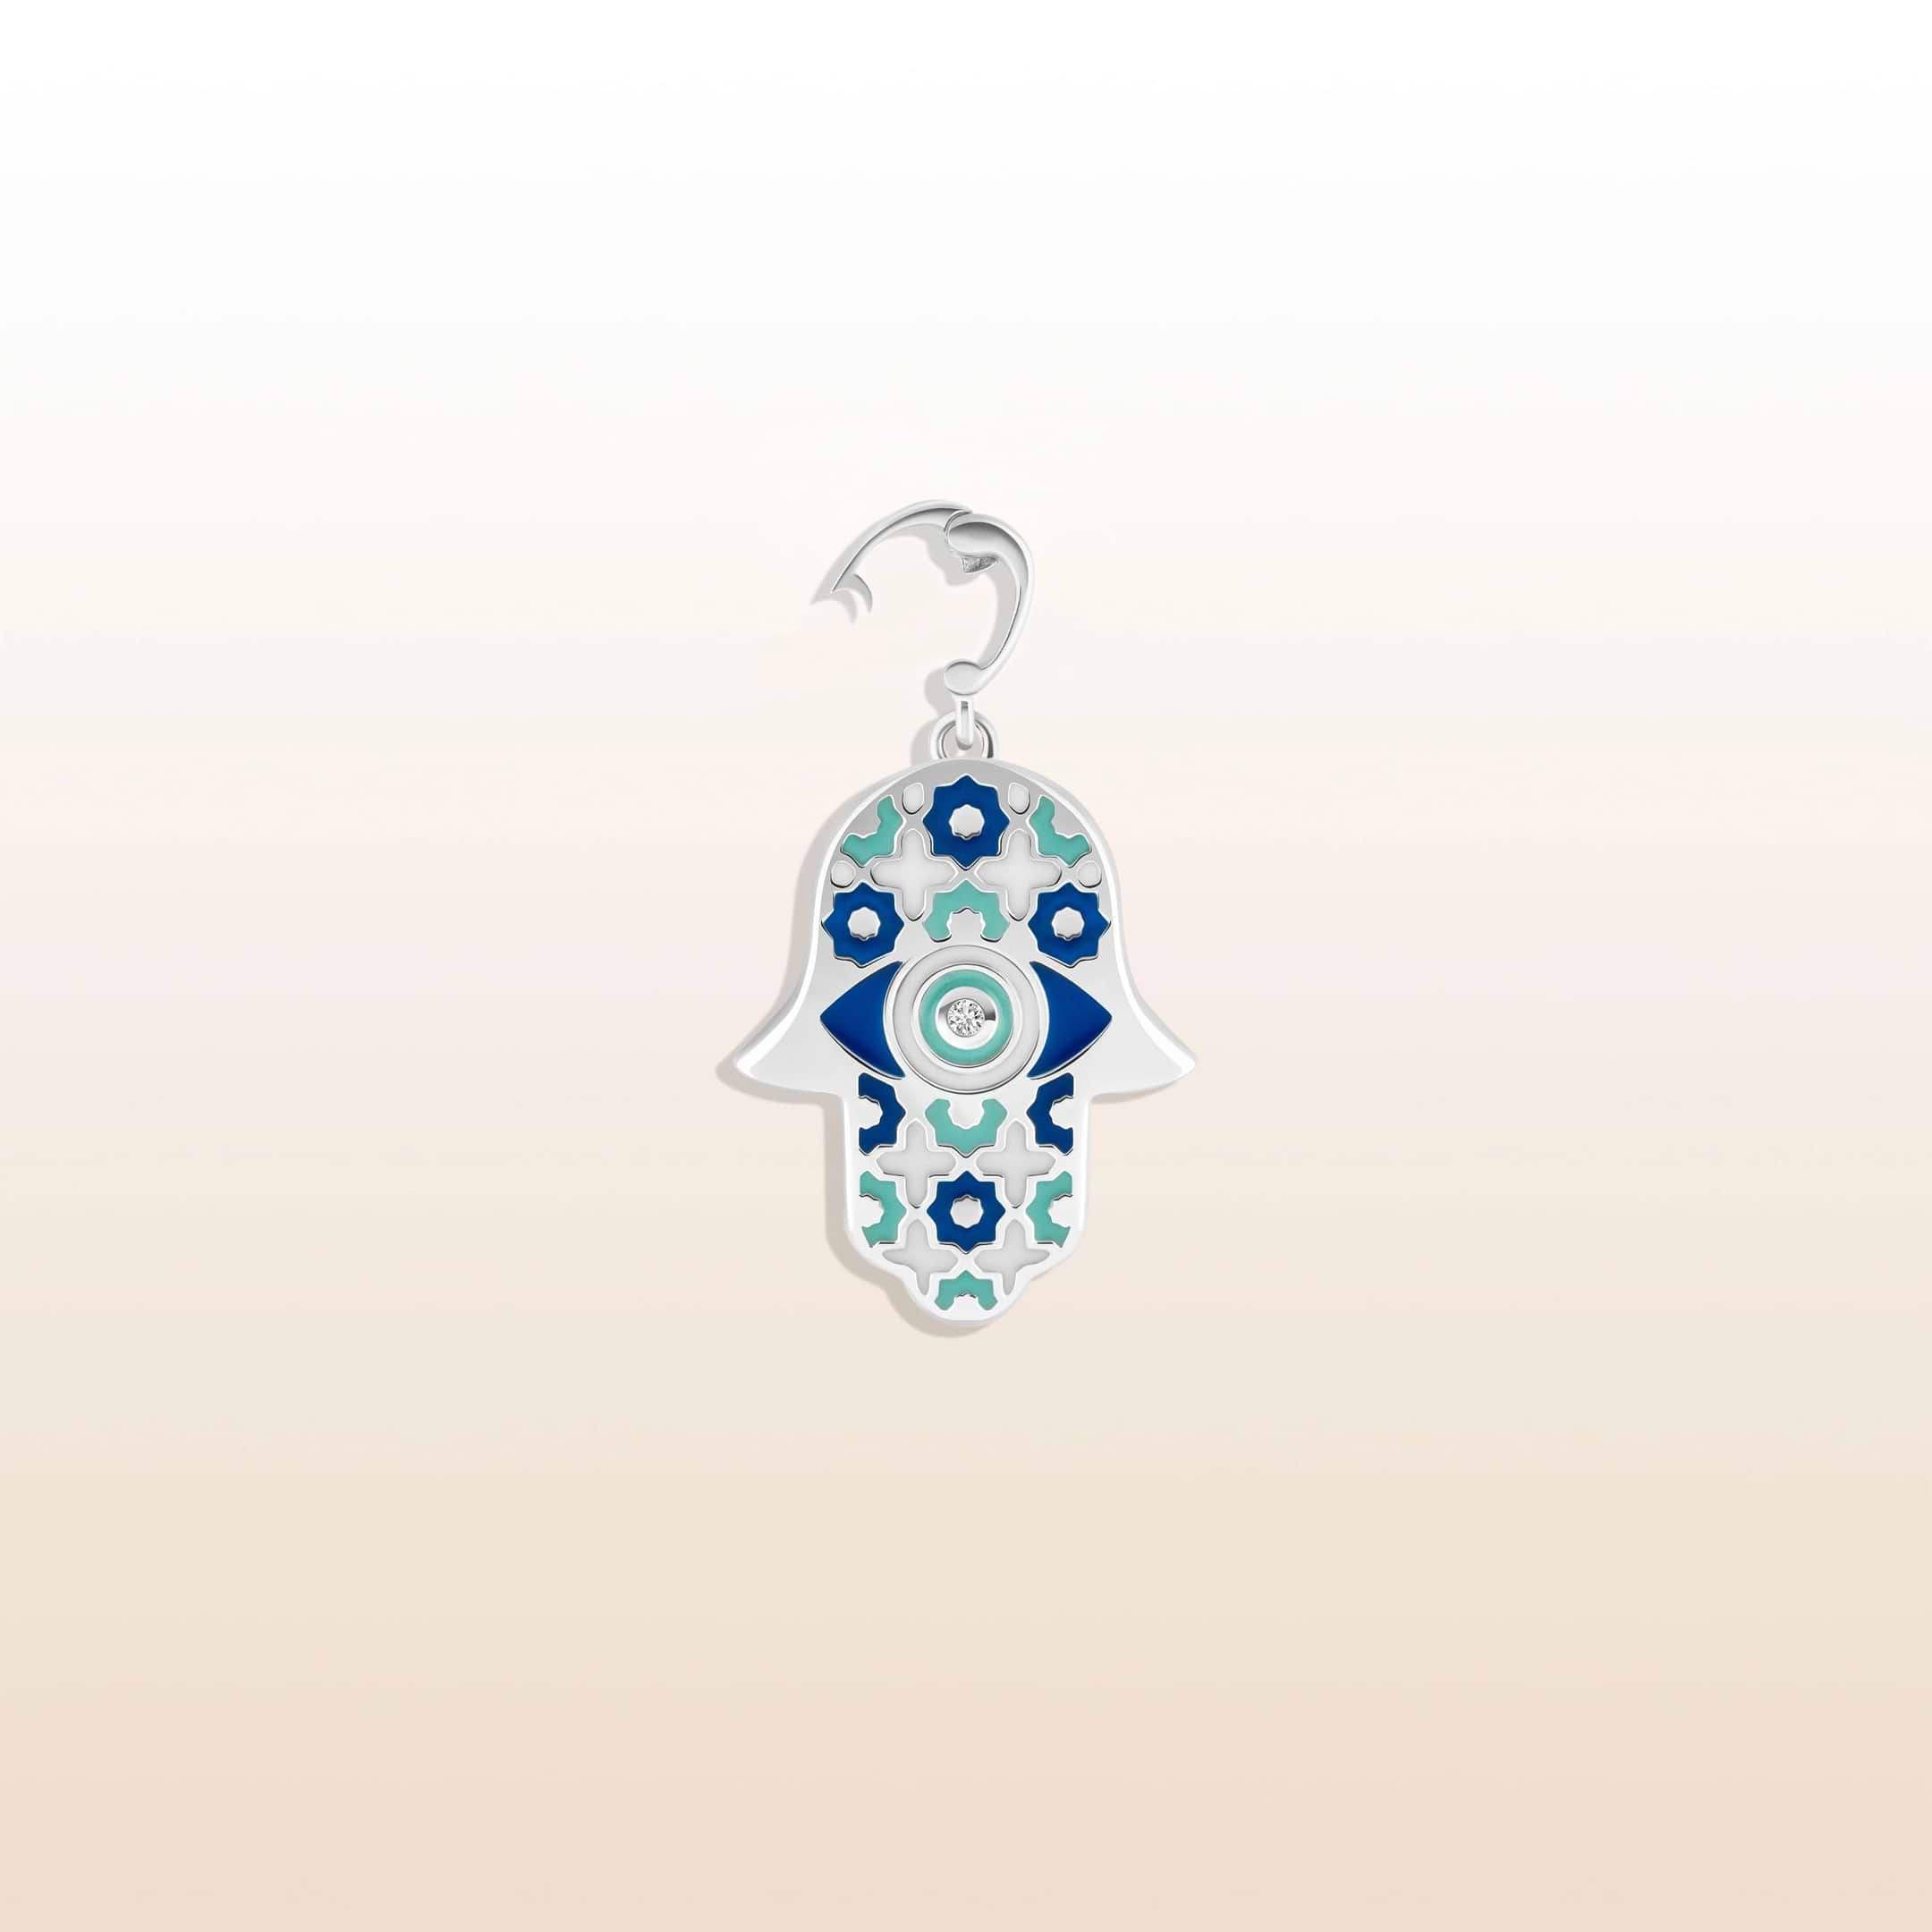 Picture of Safe & Sound - Silver Patterned Hamsa Charm